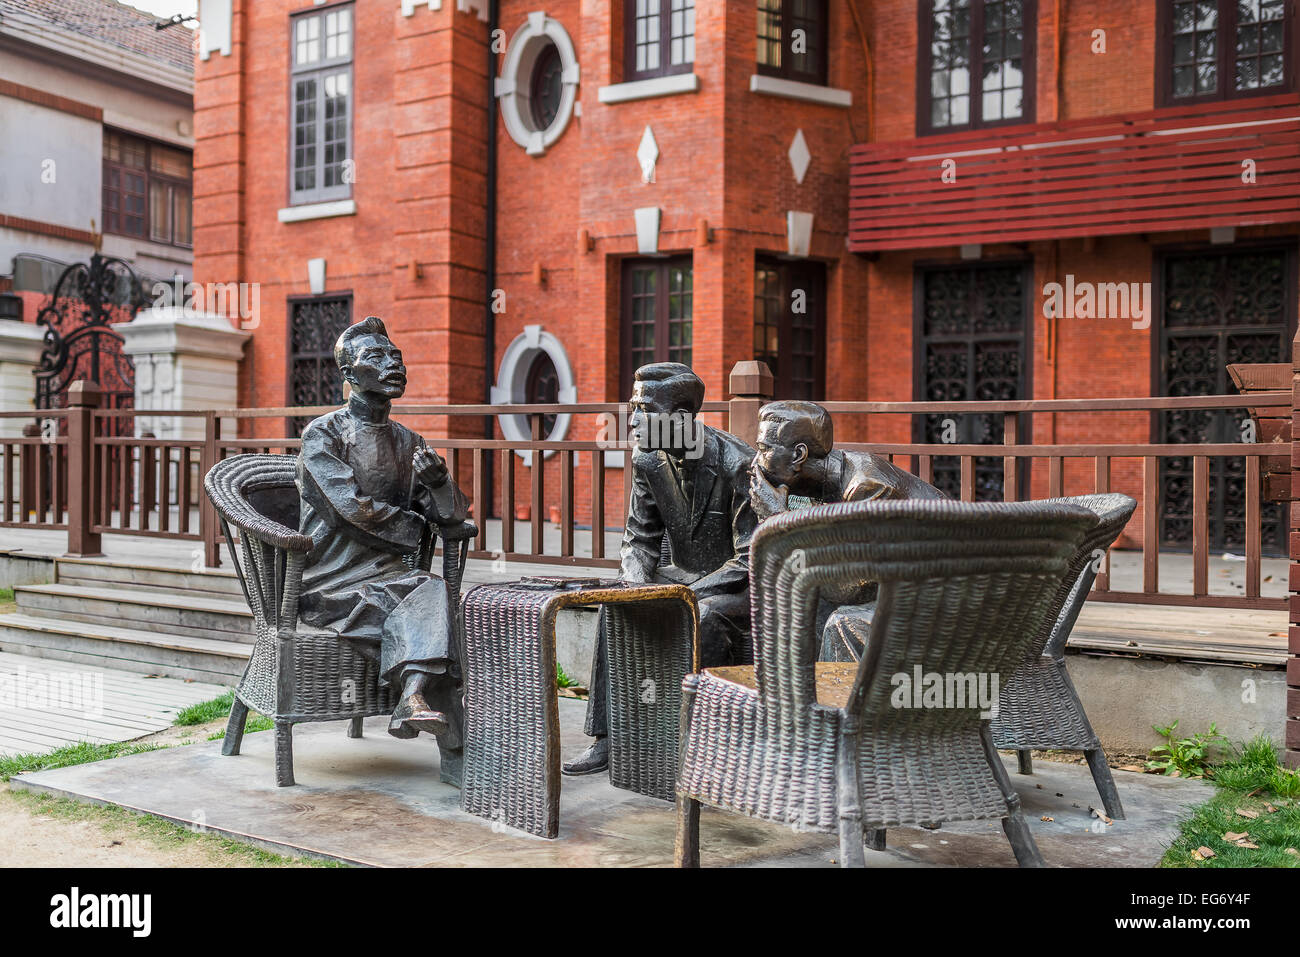 Shanghai, China - April 7, 2013: statue of Lu Xun pedestrian way of duolun road at the city of Shanghai in China on april 7th, 2013 Stock Photo